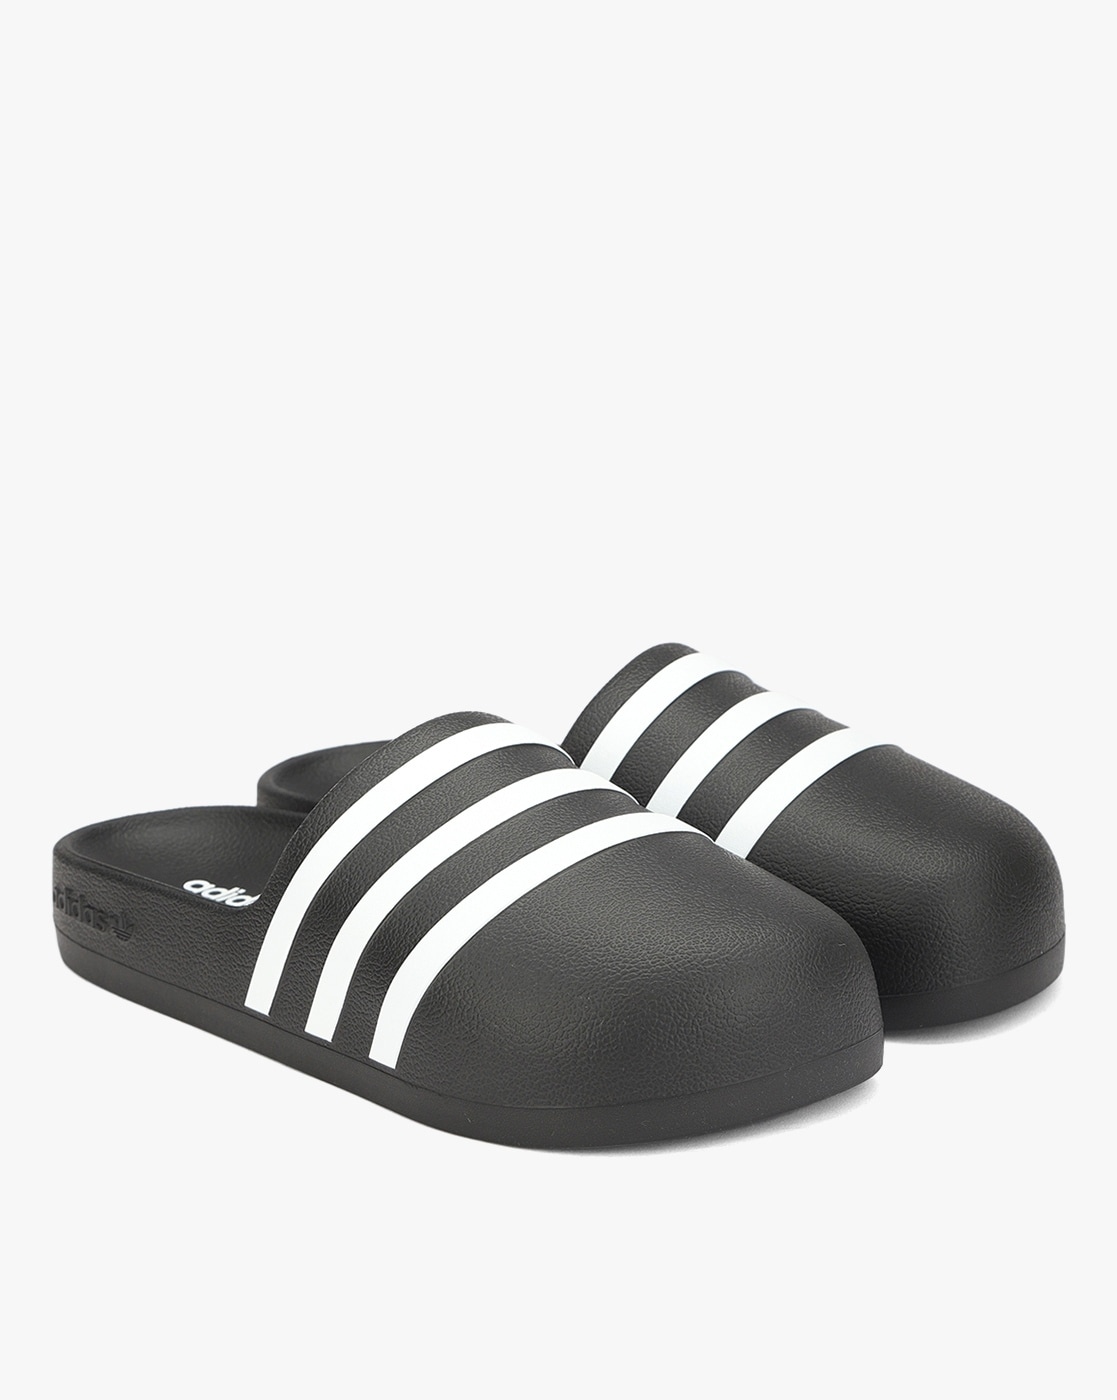 Update more than 123 adidas slippers new arrival super hot